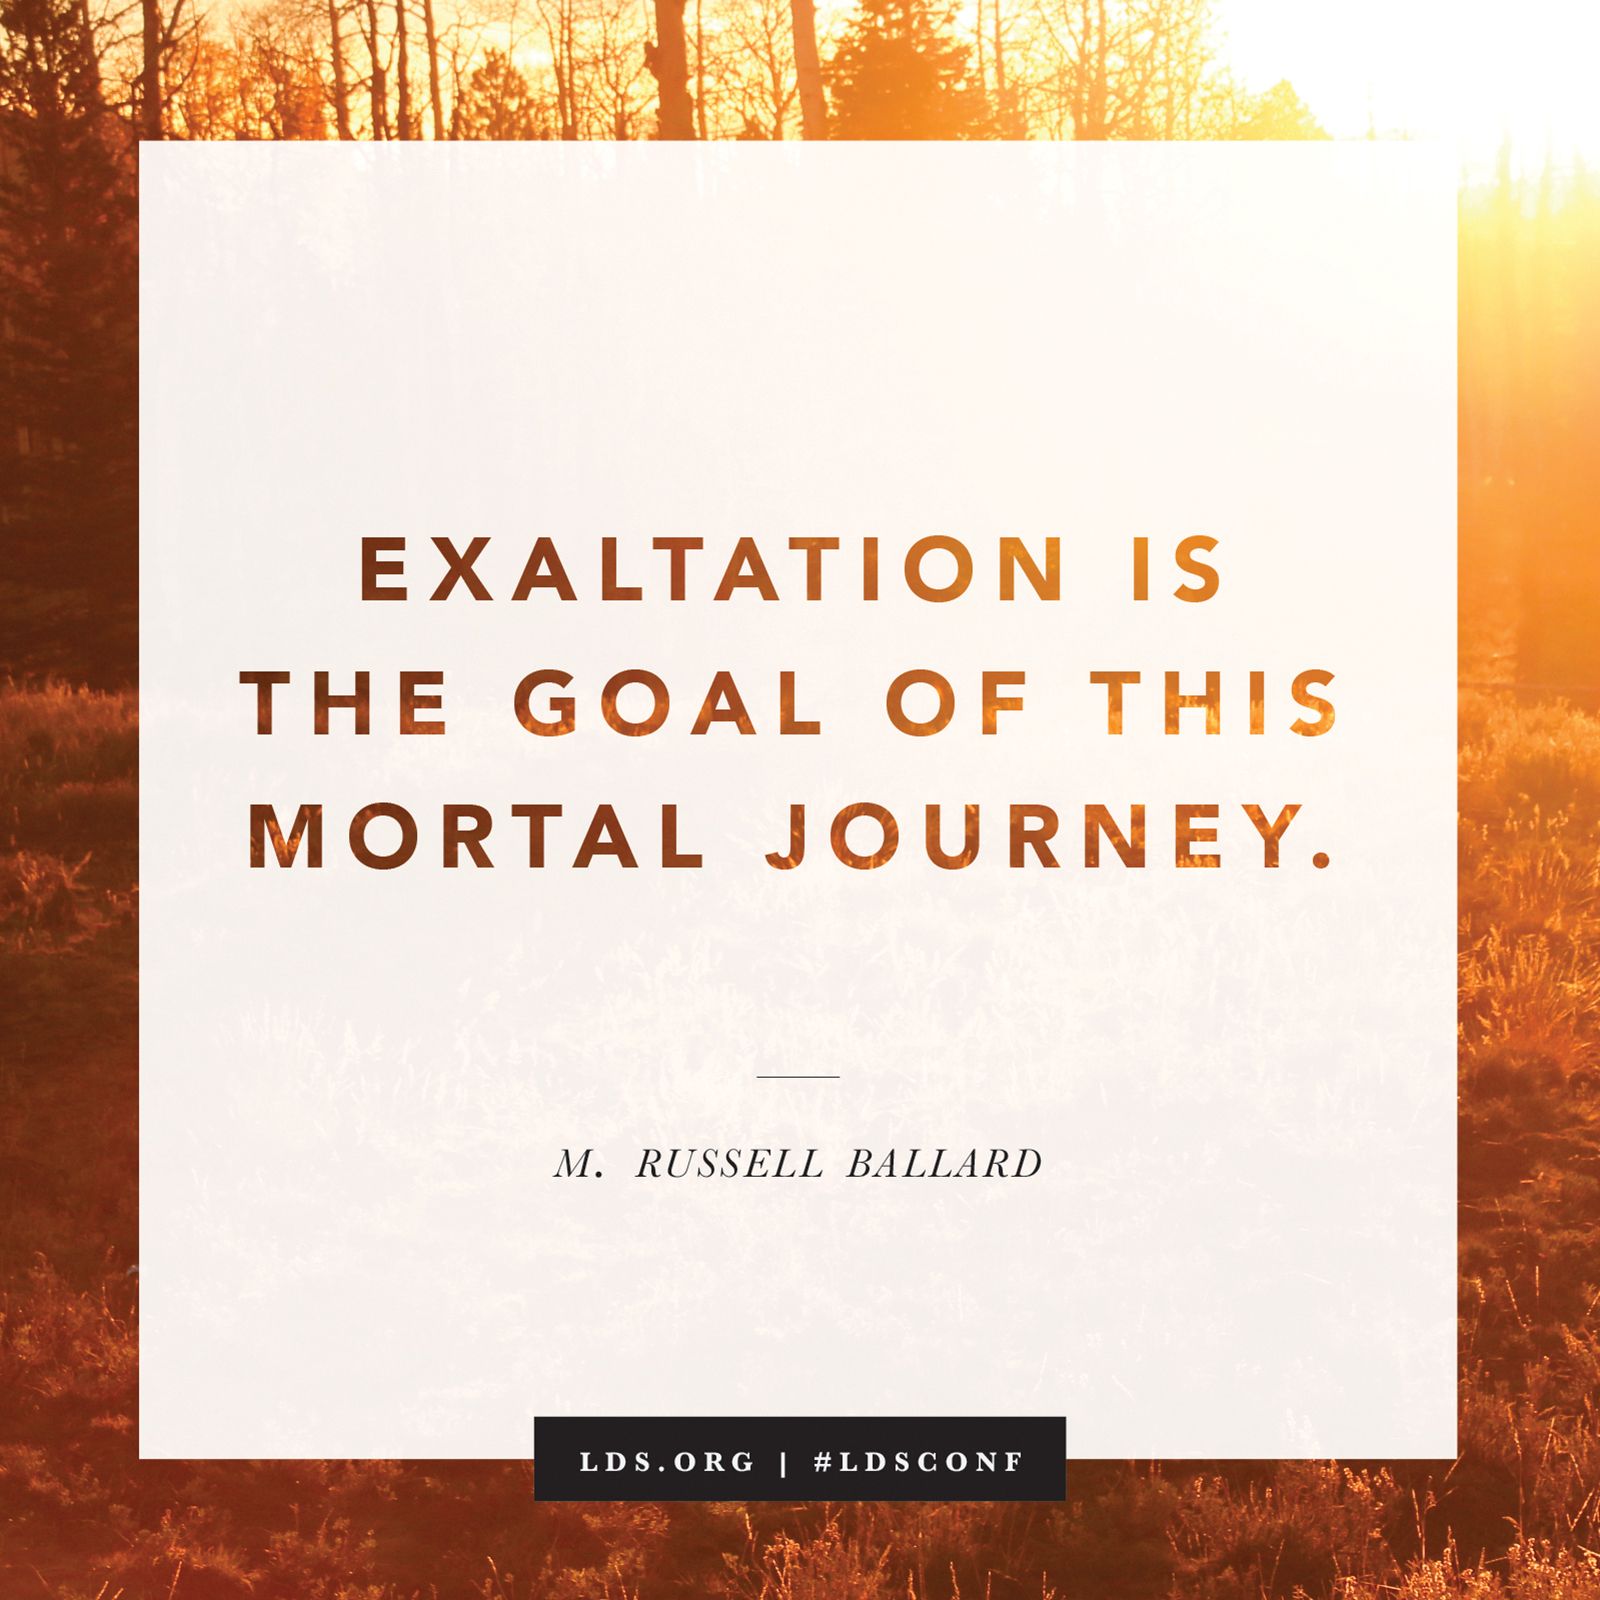 “Exaltation is the goal of this mortal journey.” —Elder M. Russell Ballard, “God Is at the Helm”